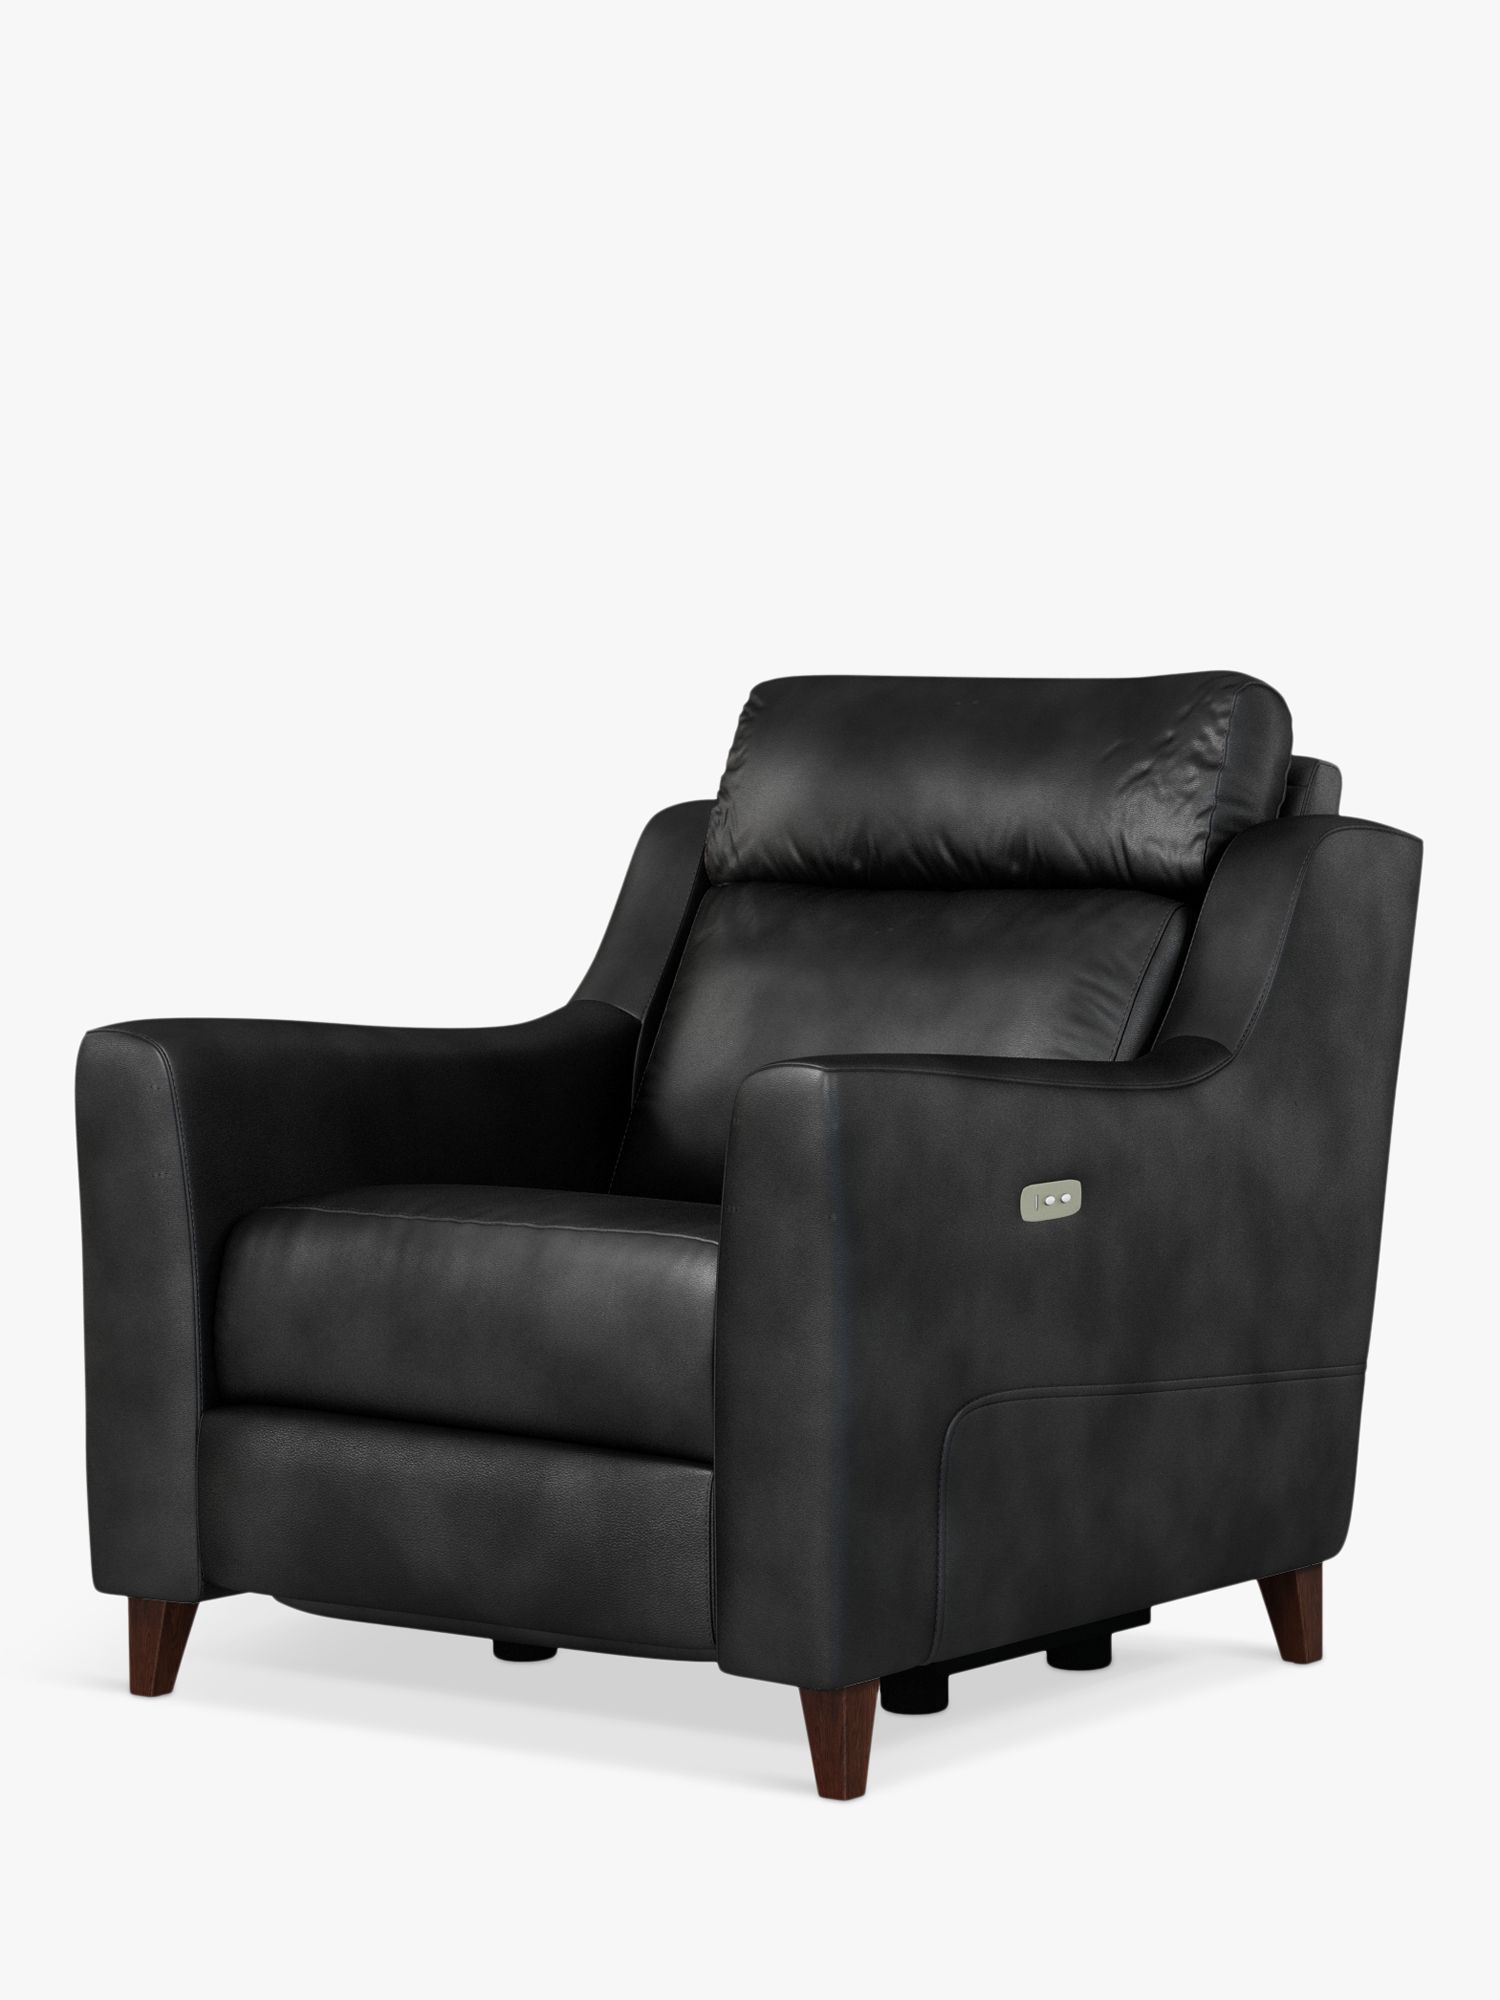 John Lewis Partners Elevate Power, Leather Oversized Recliner